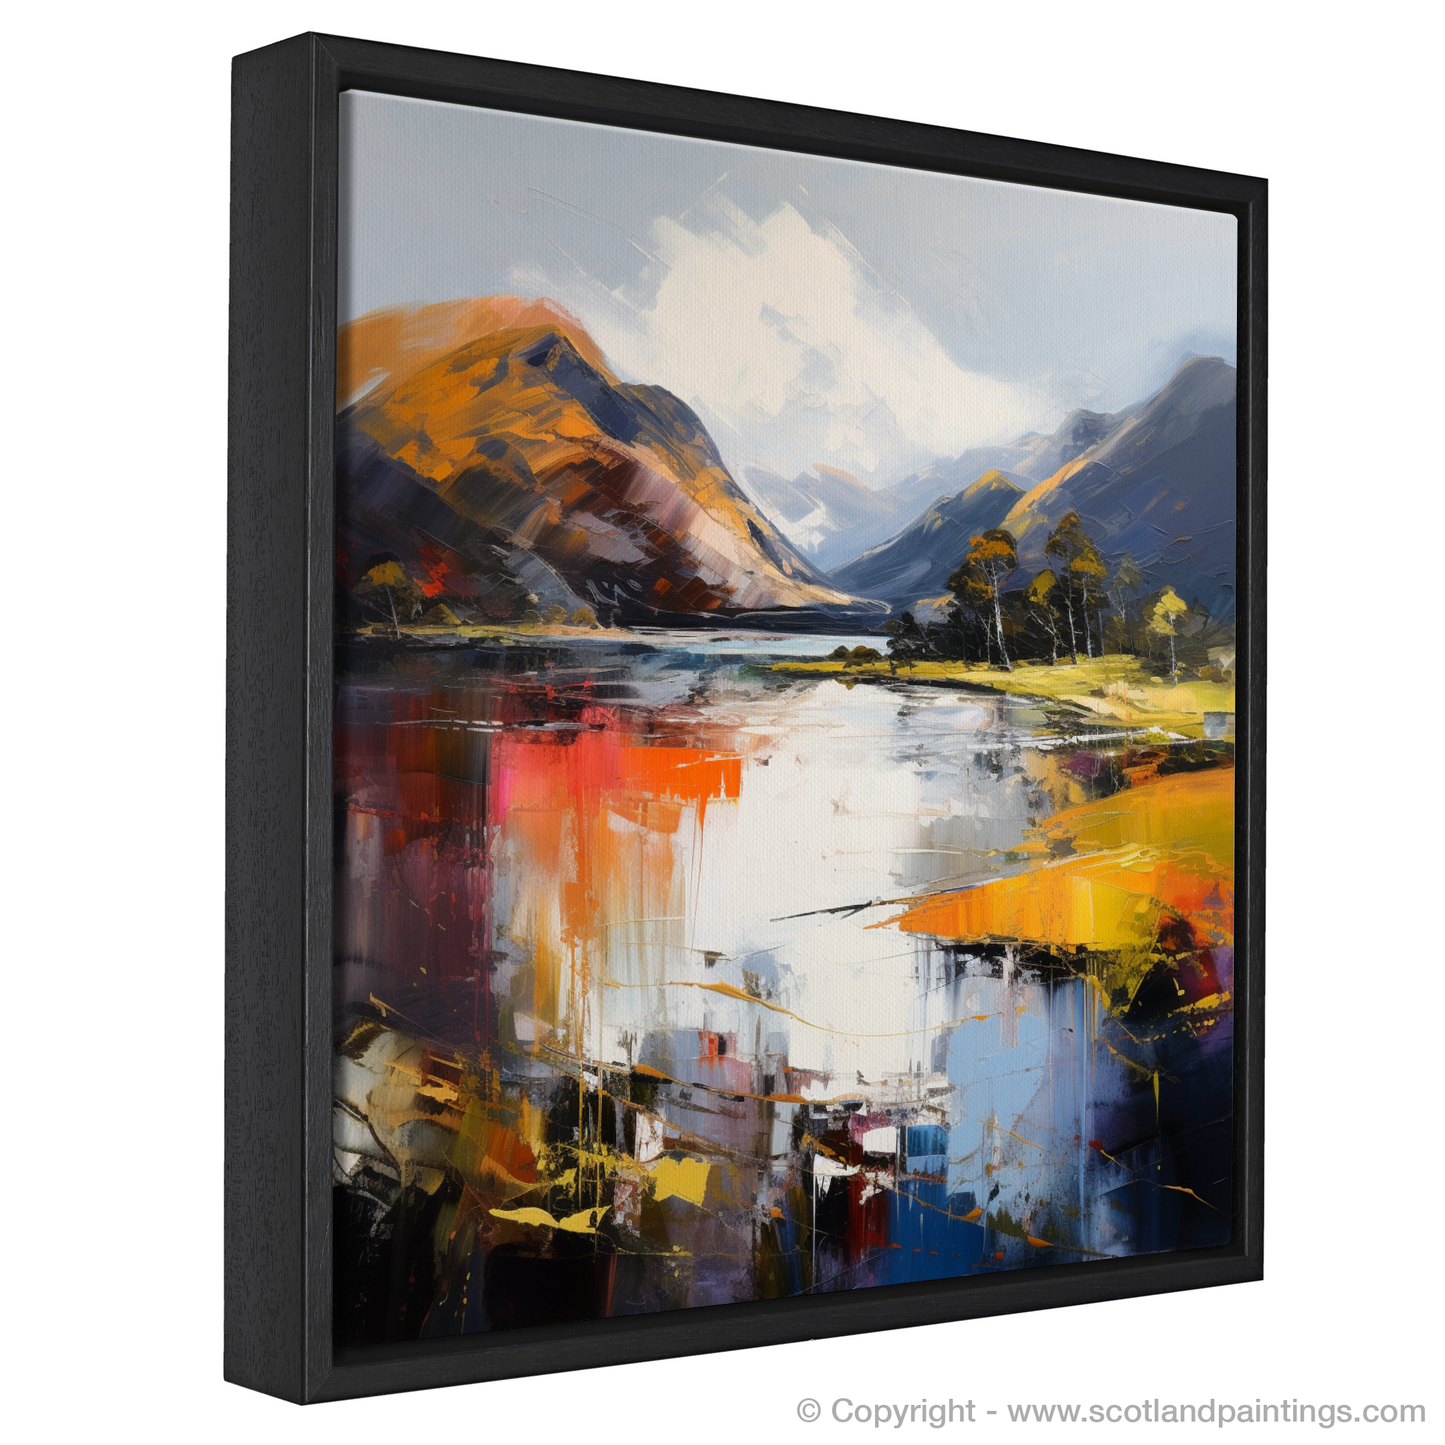 Painting and Art Print of Loch Shiel, Highlands entitled "Wild Essence of Loch Shiel: An Expressionist Ode to the Scottish Highlands".